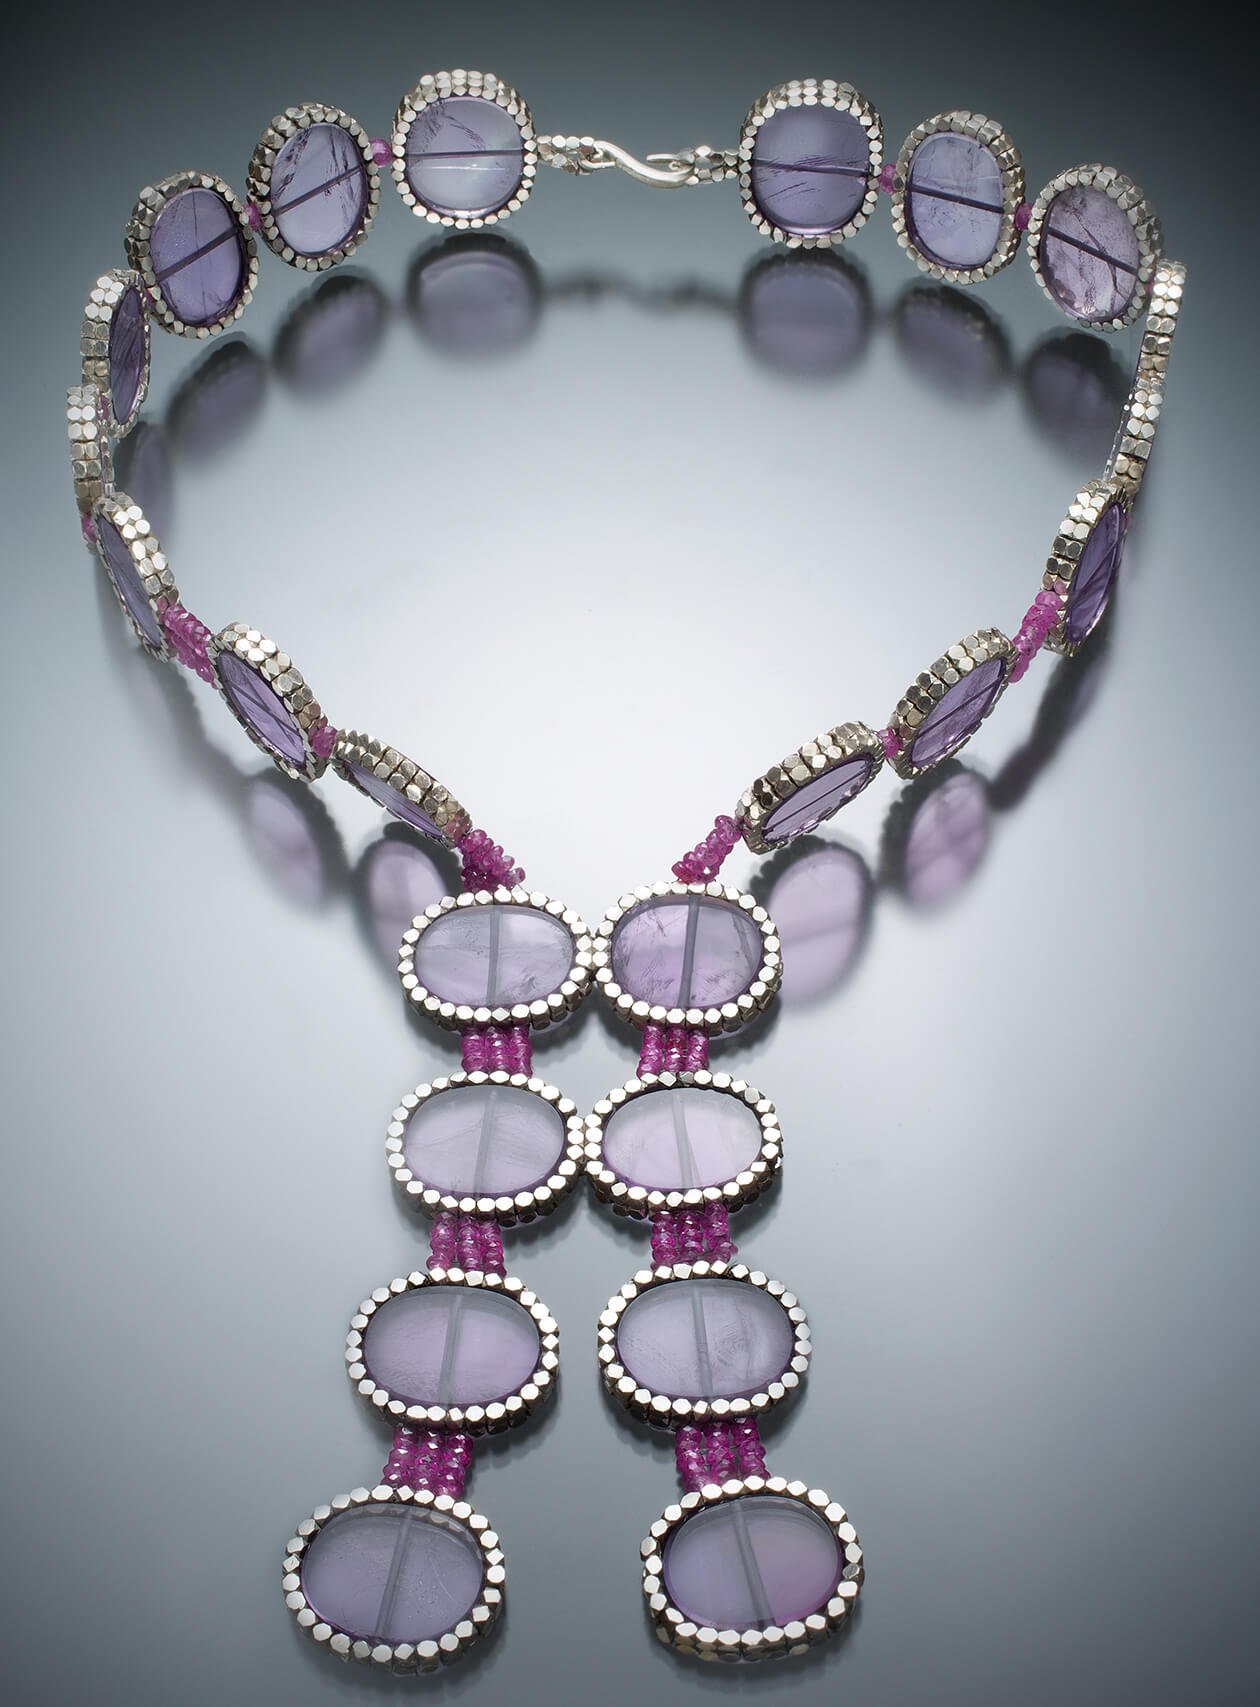 Amethyst Collar. Slices of amethyst are set in hand woven silver and pink sapphire beads.